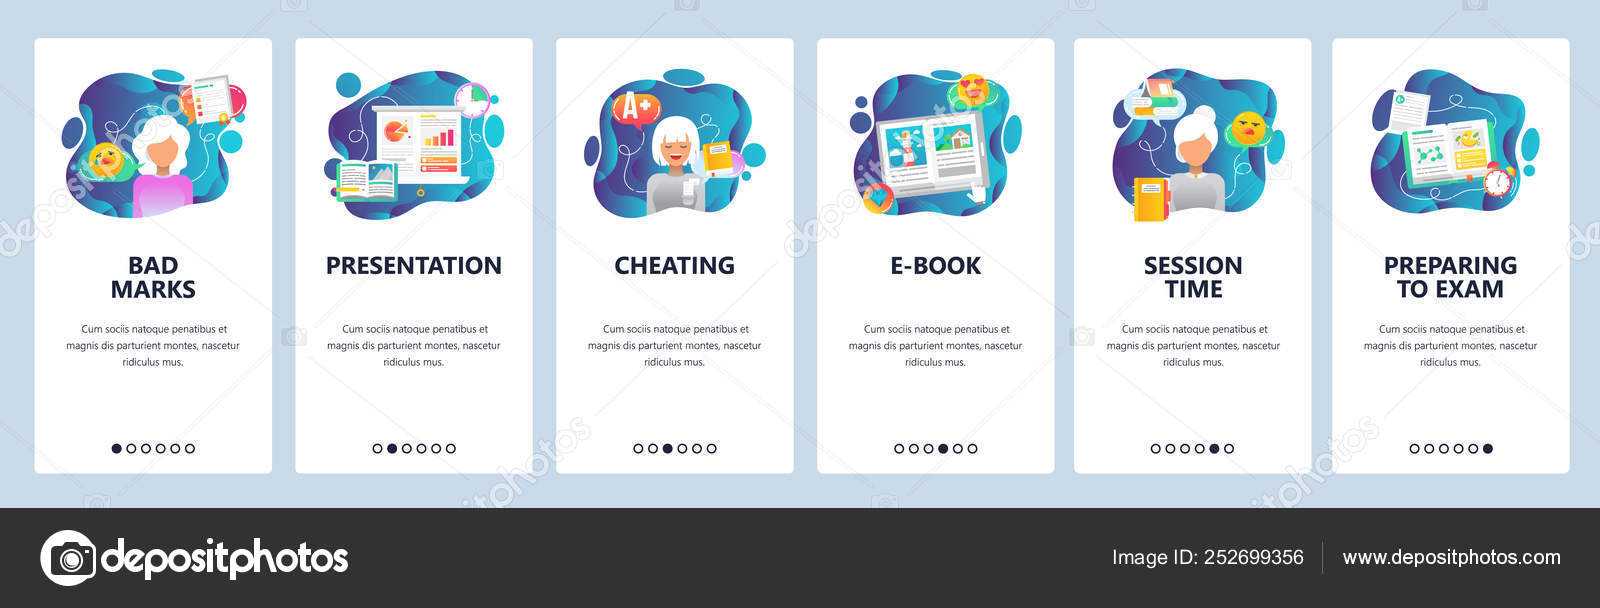 Mobile App Onboarding Screens. School And College Education Regarding College Banner Template